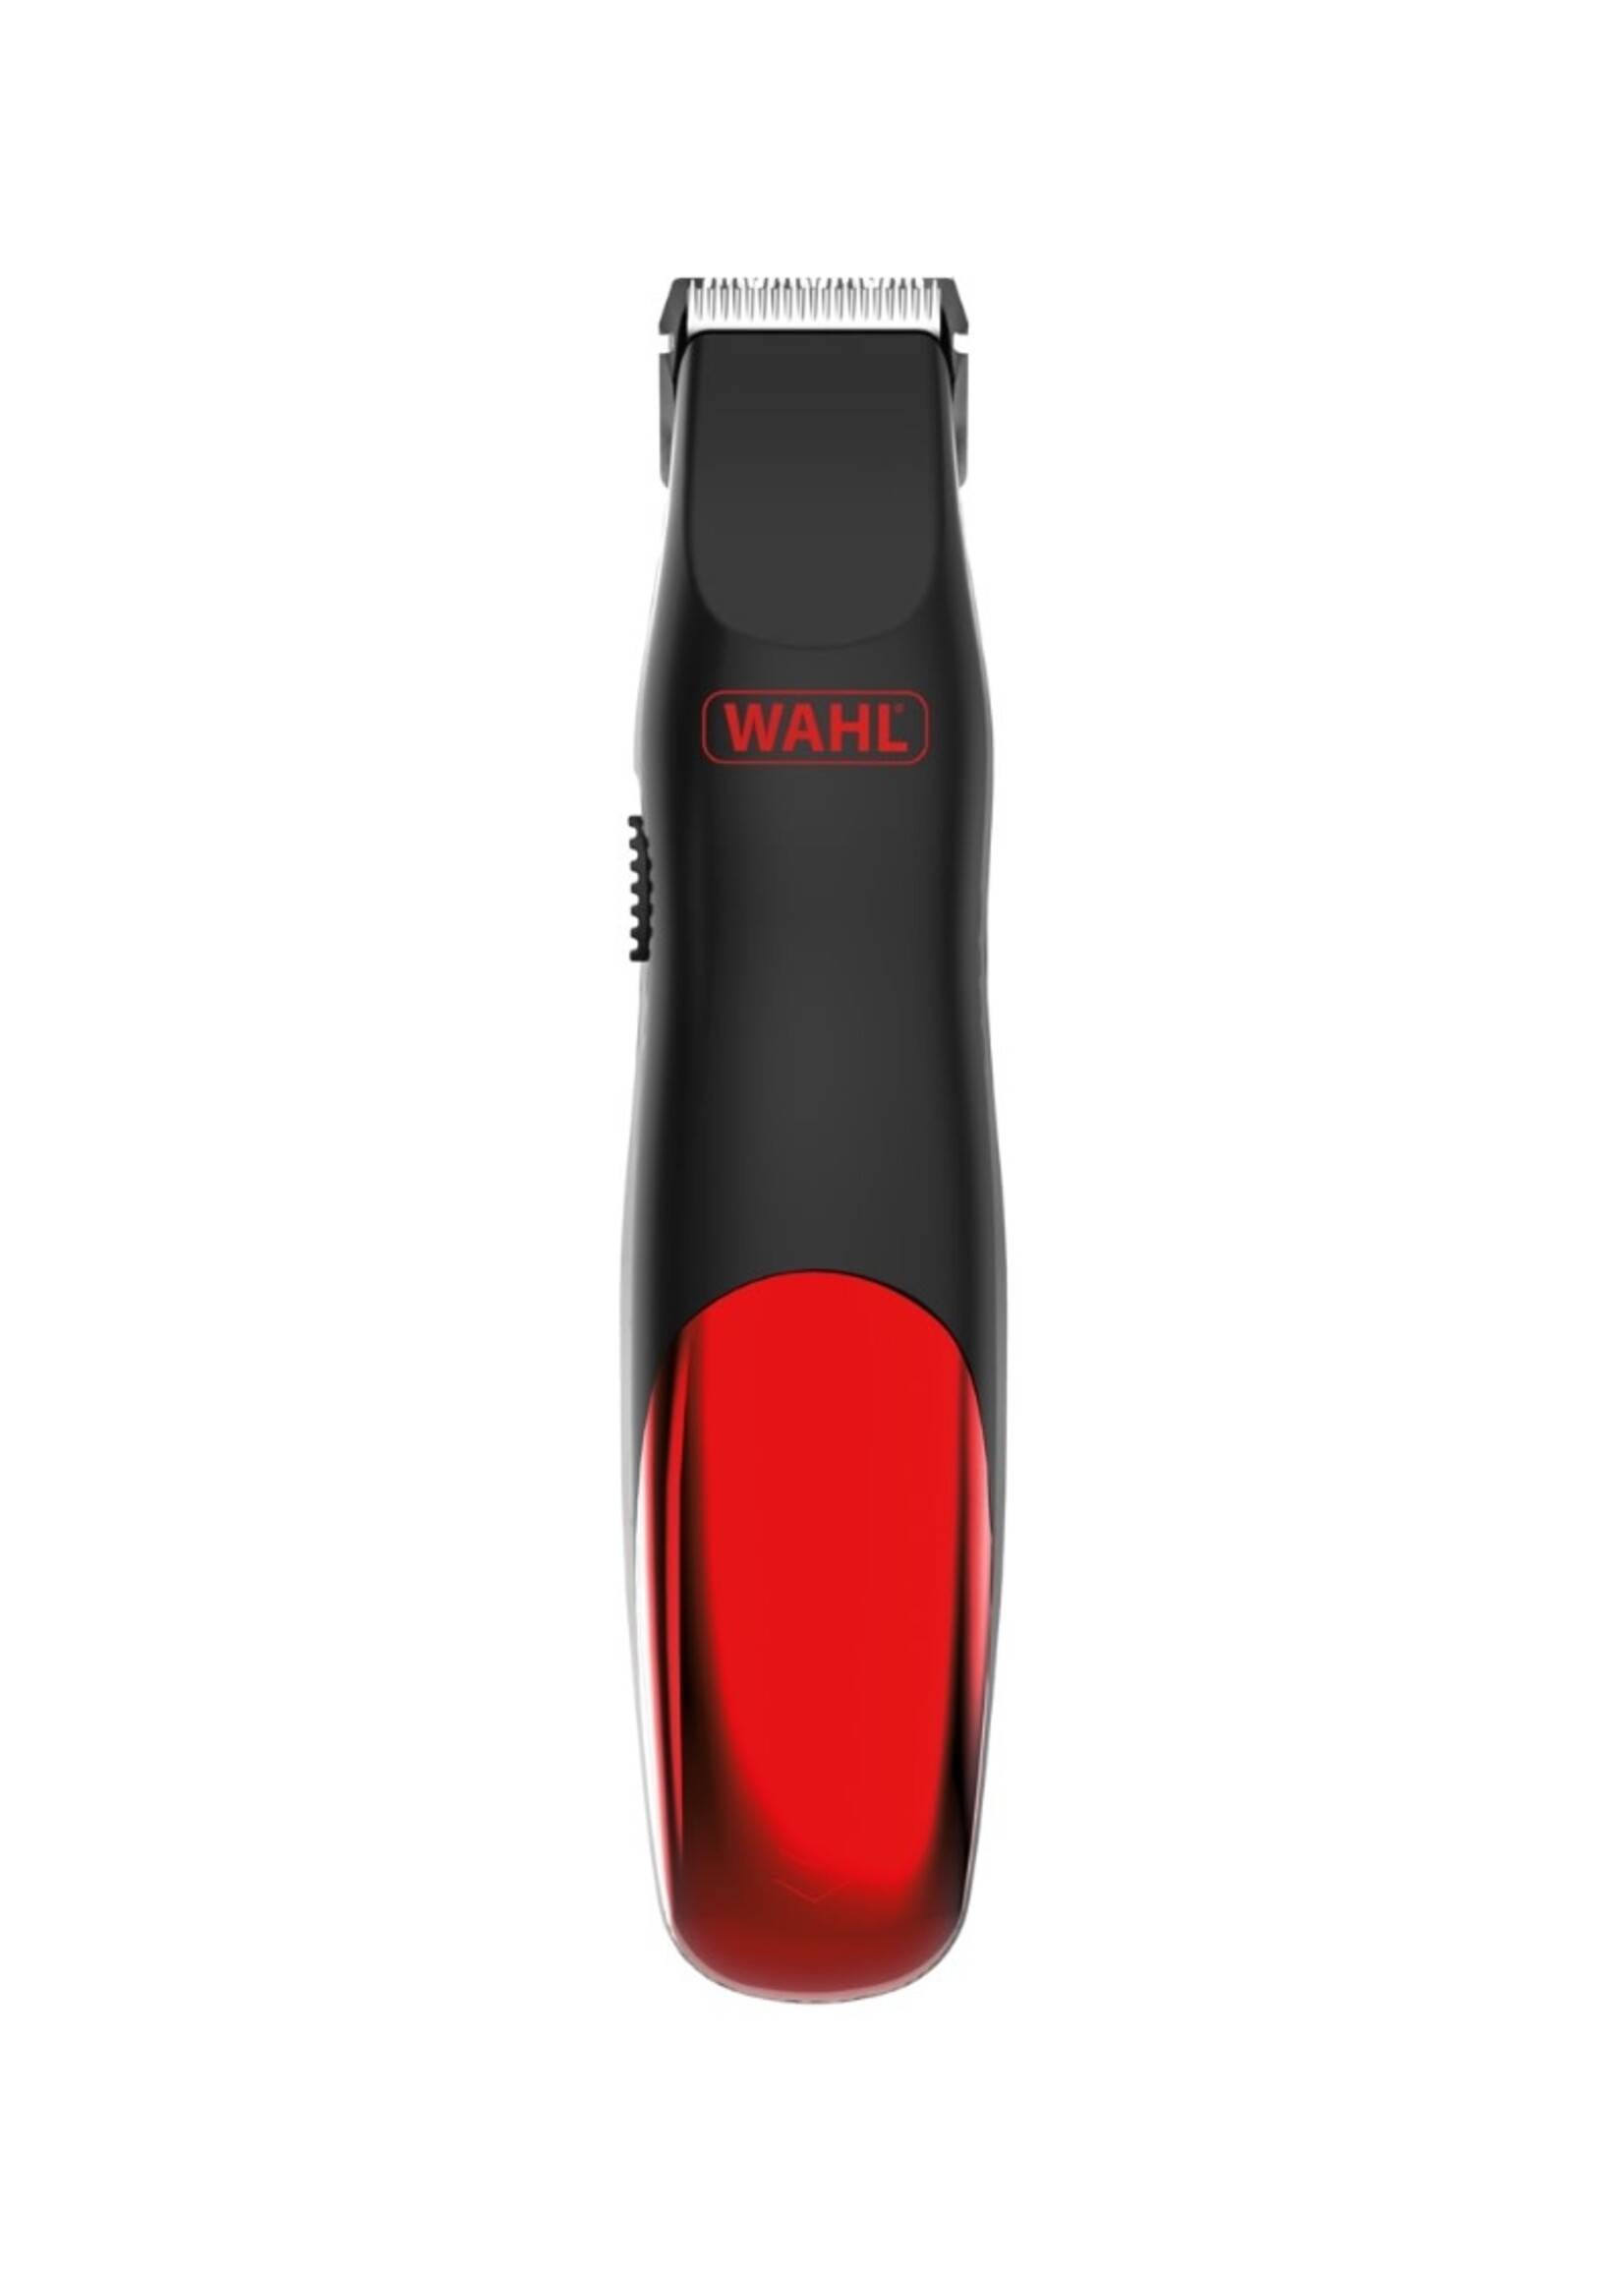 Wahl Home Wahl Precision Beard Battery Trimmer